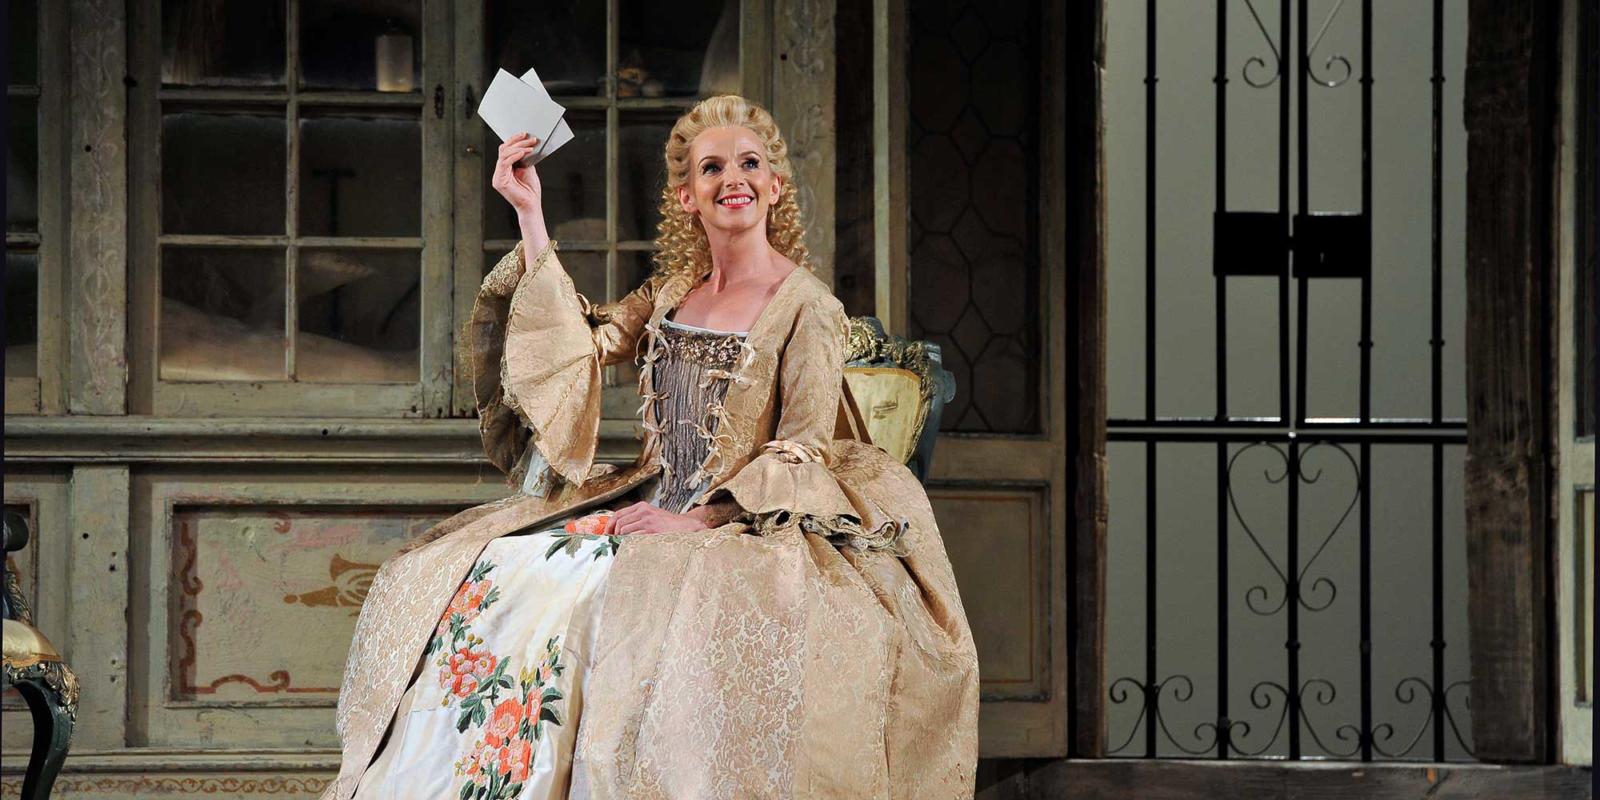 ENO The Barber of Seville: Sarah Tynan in period costume on stage (c) Robbie Jack